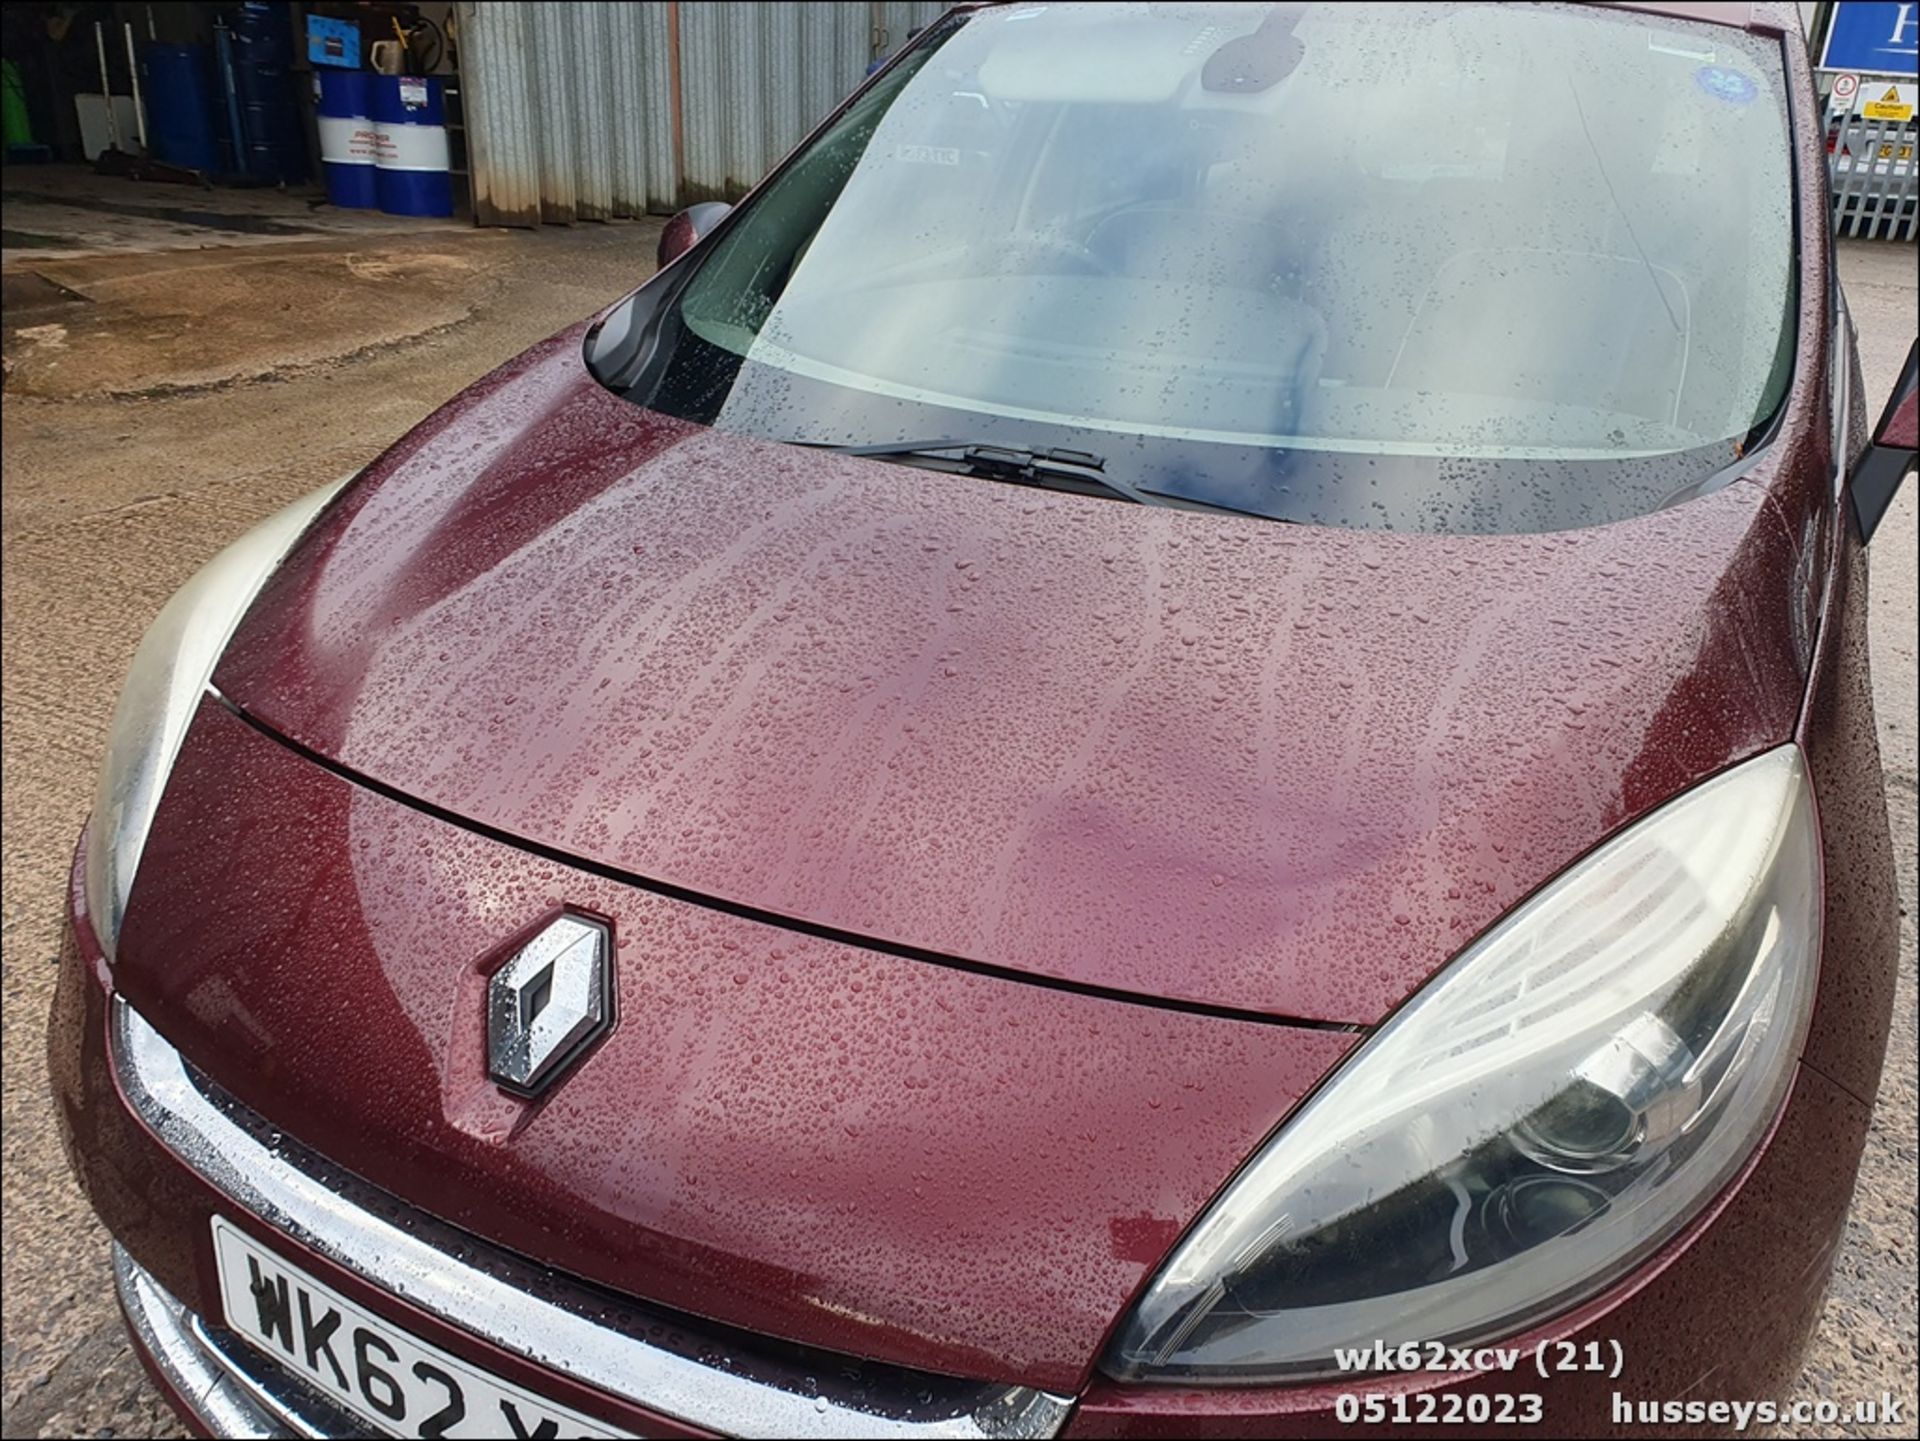 12/62 RENAULT G SCENIC D-QUETTLUXE NRG - 1598cc 5dr MPV (Red) - Image 22 of 53